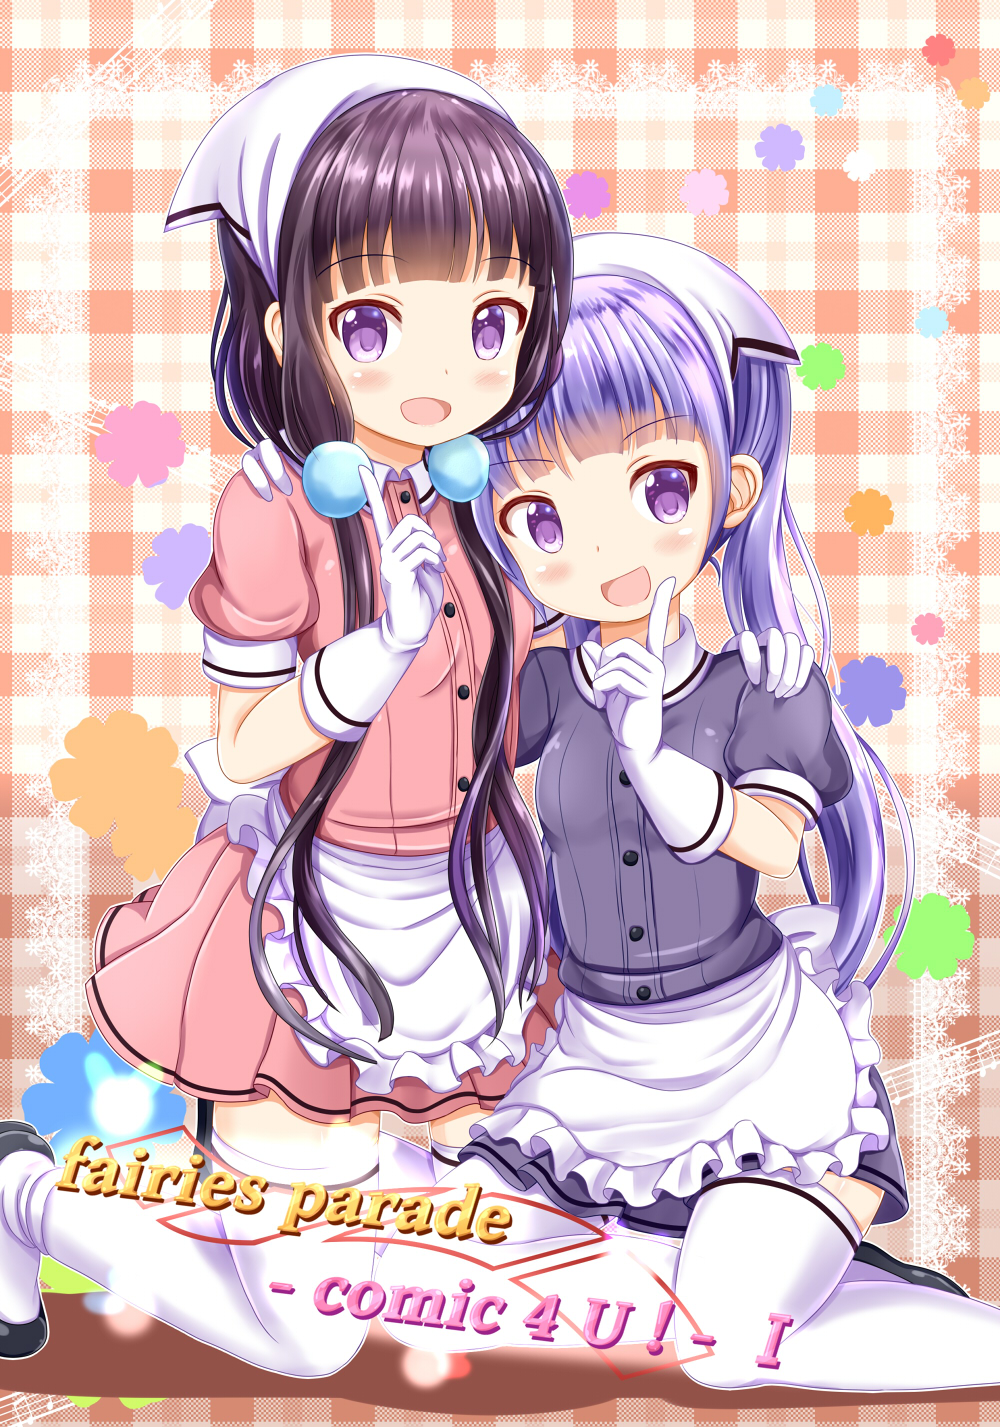 2girls :d apron bangs black_footwear blend_s blunt_bangs blush collared_shirt commentary_request company_connection cosplay crossover eyebrows_visible_through_hair frilled_apron frills hair_ornament head_scarf highres index_finger_raised kneeling long_hair looking_at_viewer low_twintails manga_time_kirara multiple_girls new_game! open_mouth pink_shirt pink_skirt plaid plaid_background pleated_skirt puffy_short_sleeves puffy_sleeves purple_hair purple_shirt purple_skirt sakuranomiya_maika shirt shoes short_sleeves skirt smile stile_uniform suzukaze_aoba thigh-highs twintails uniform very_long_hair violet_eyes waist_apron waitress white_apron white_legwear zenon_(for_achieve)